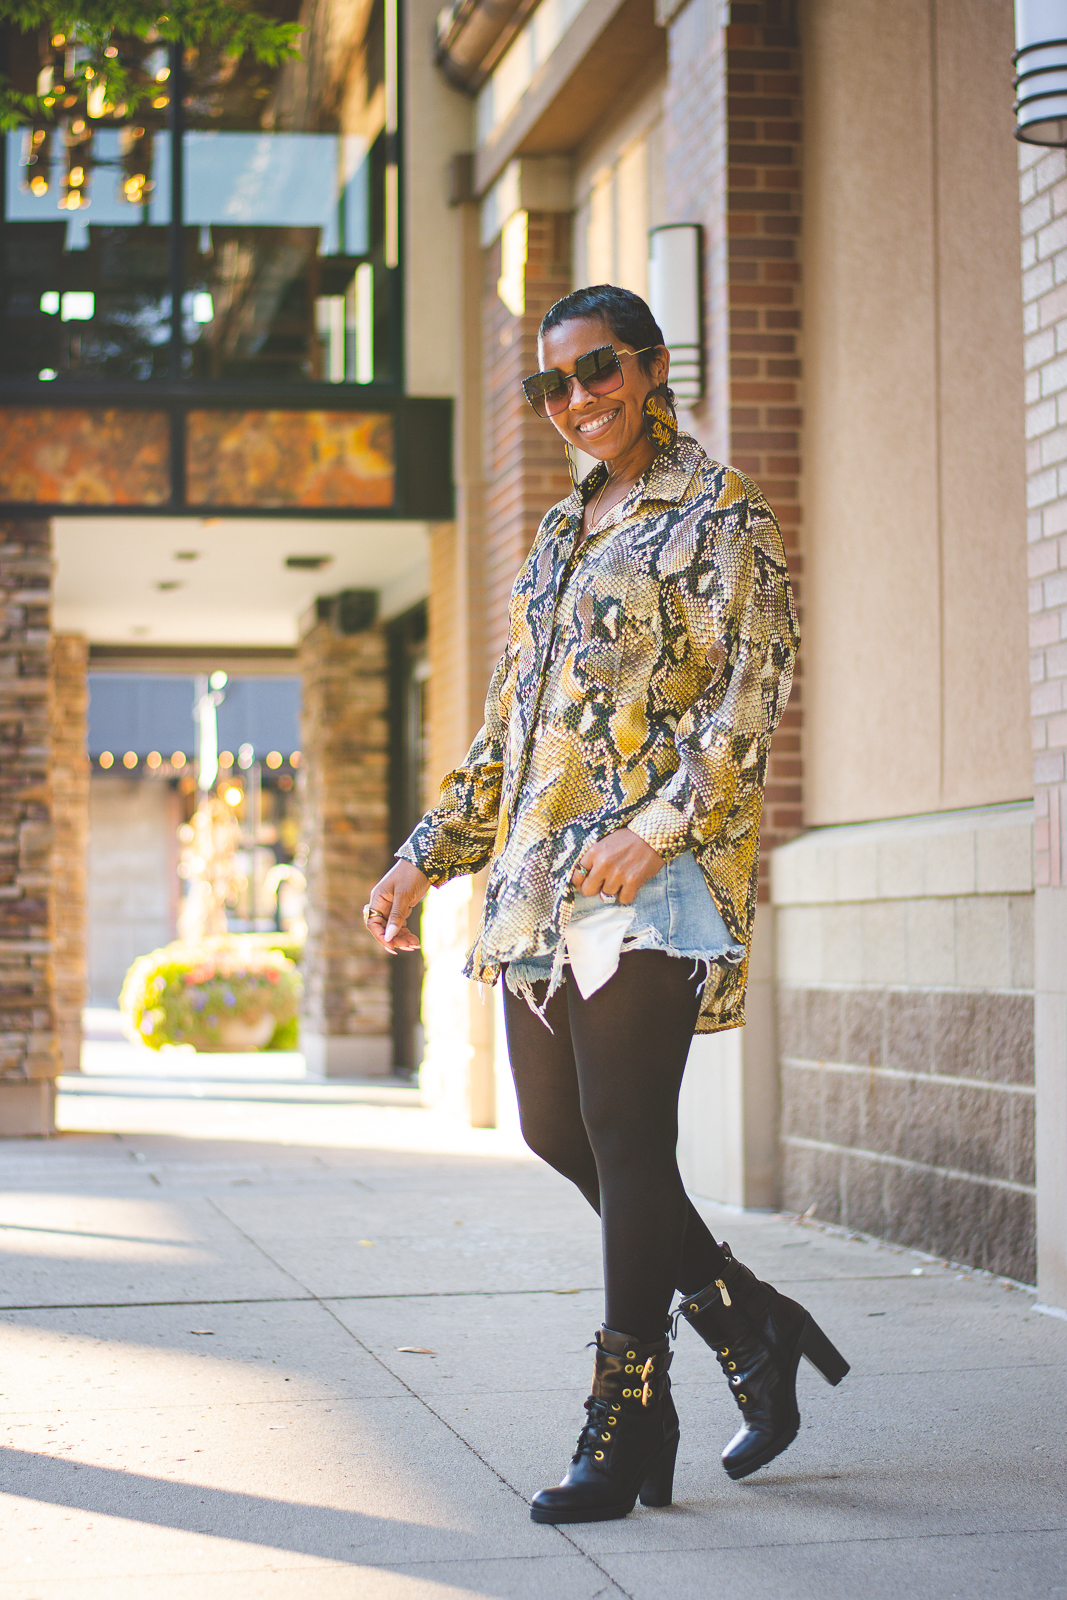 USE WHAT'CHA GOT!, OUTFIT IDEAS, OUTFIT, OUTFIT POST, Fall 2019, fall outfit ideas, Winter Outfit Idea, Winter 2019, Sweenee Style, Indianapolis Style Blog, Black Girls who blog, Outfit Inspiration, How to wear denim shorts, How to wear button up top, how to wear snakeskin